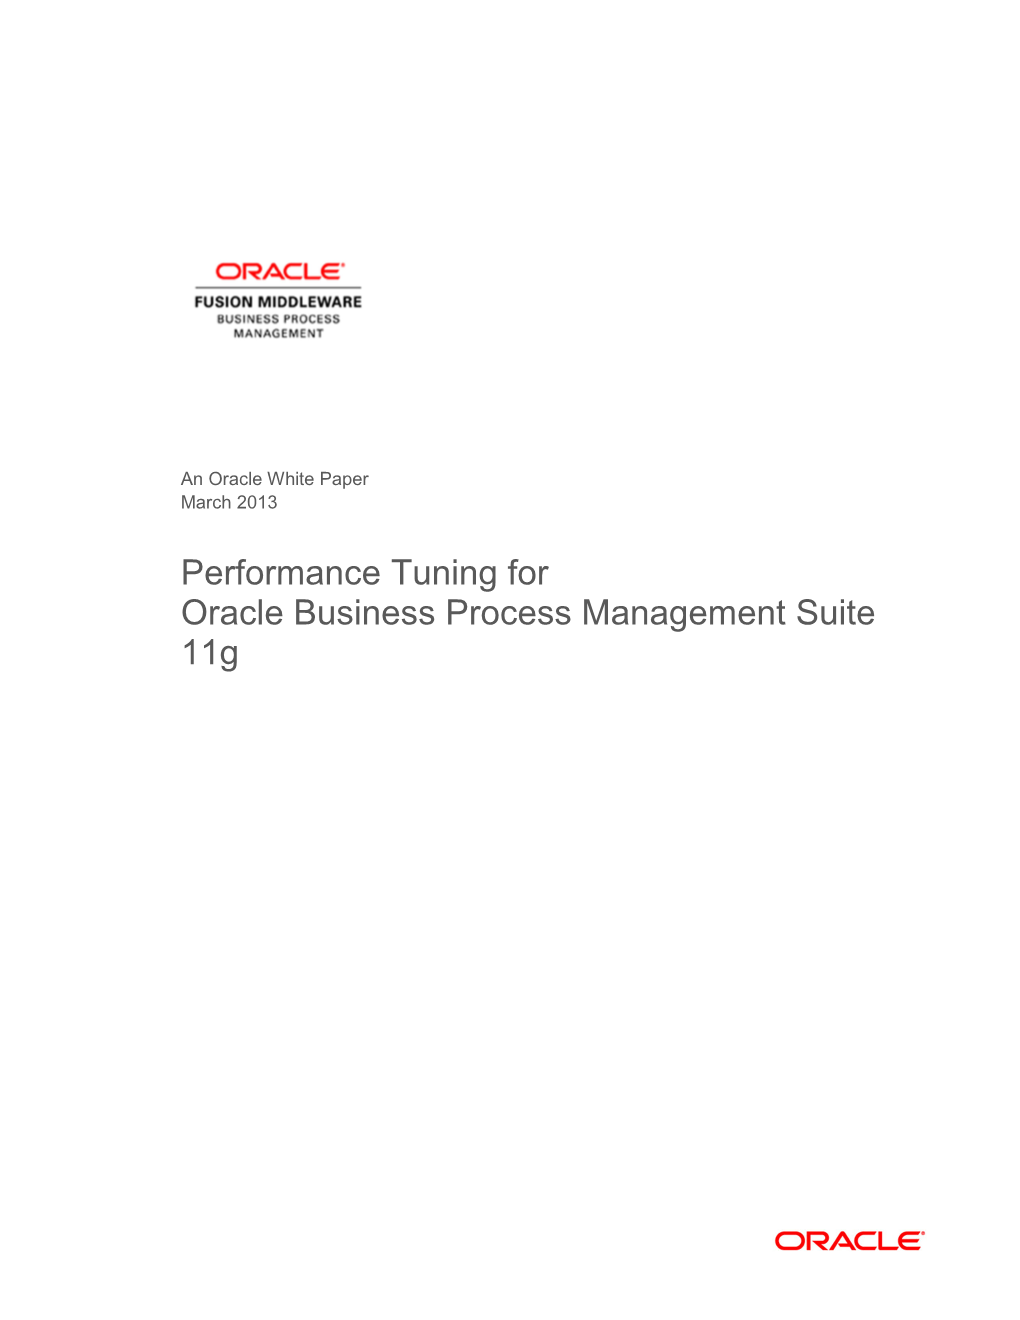 Performance Tuning for Oracle Business Process Management Suite 11G